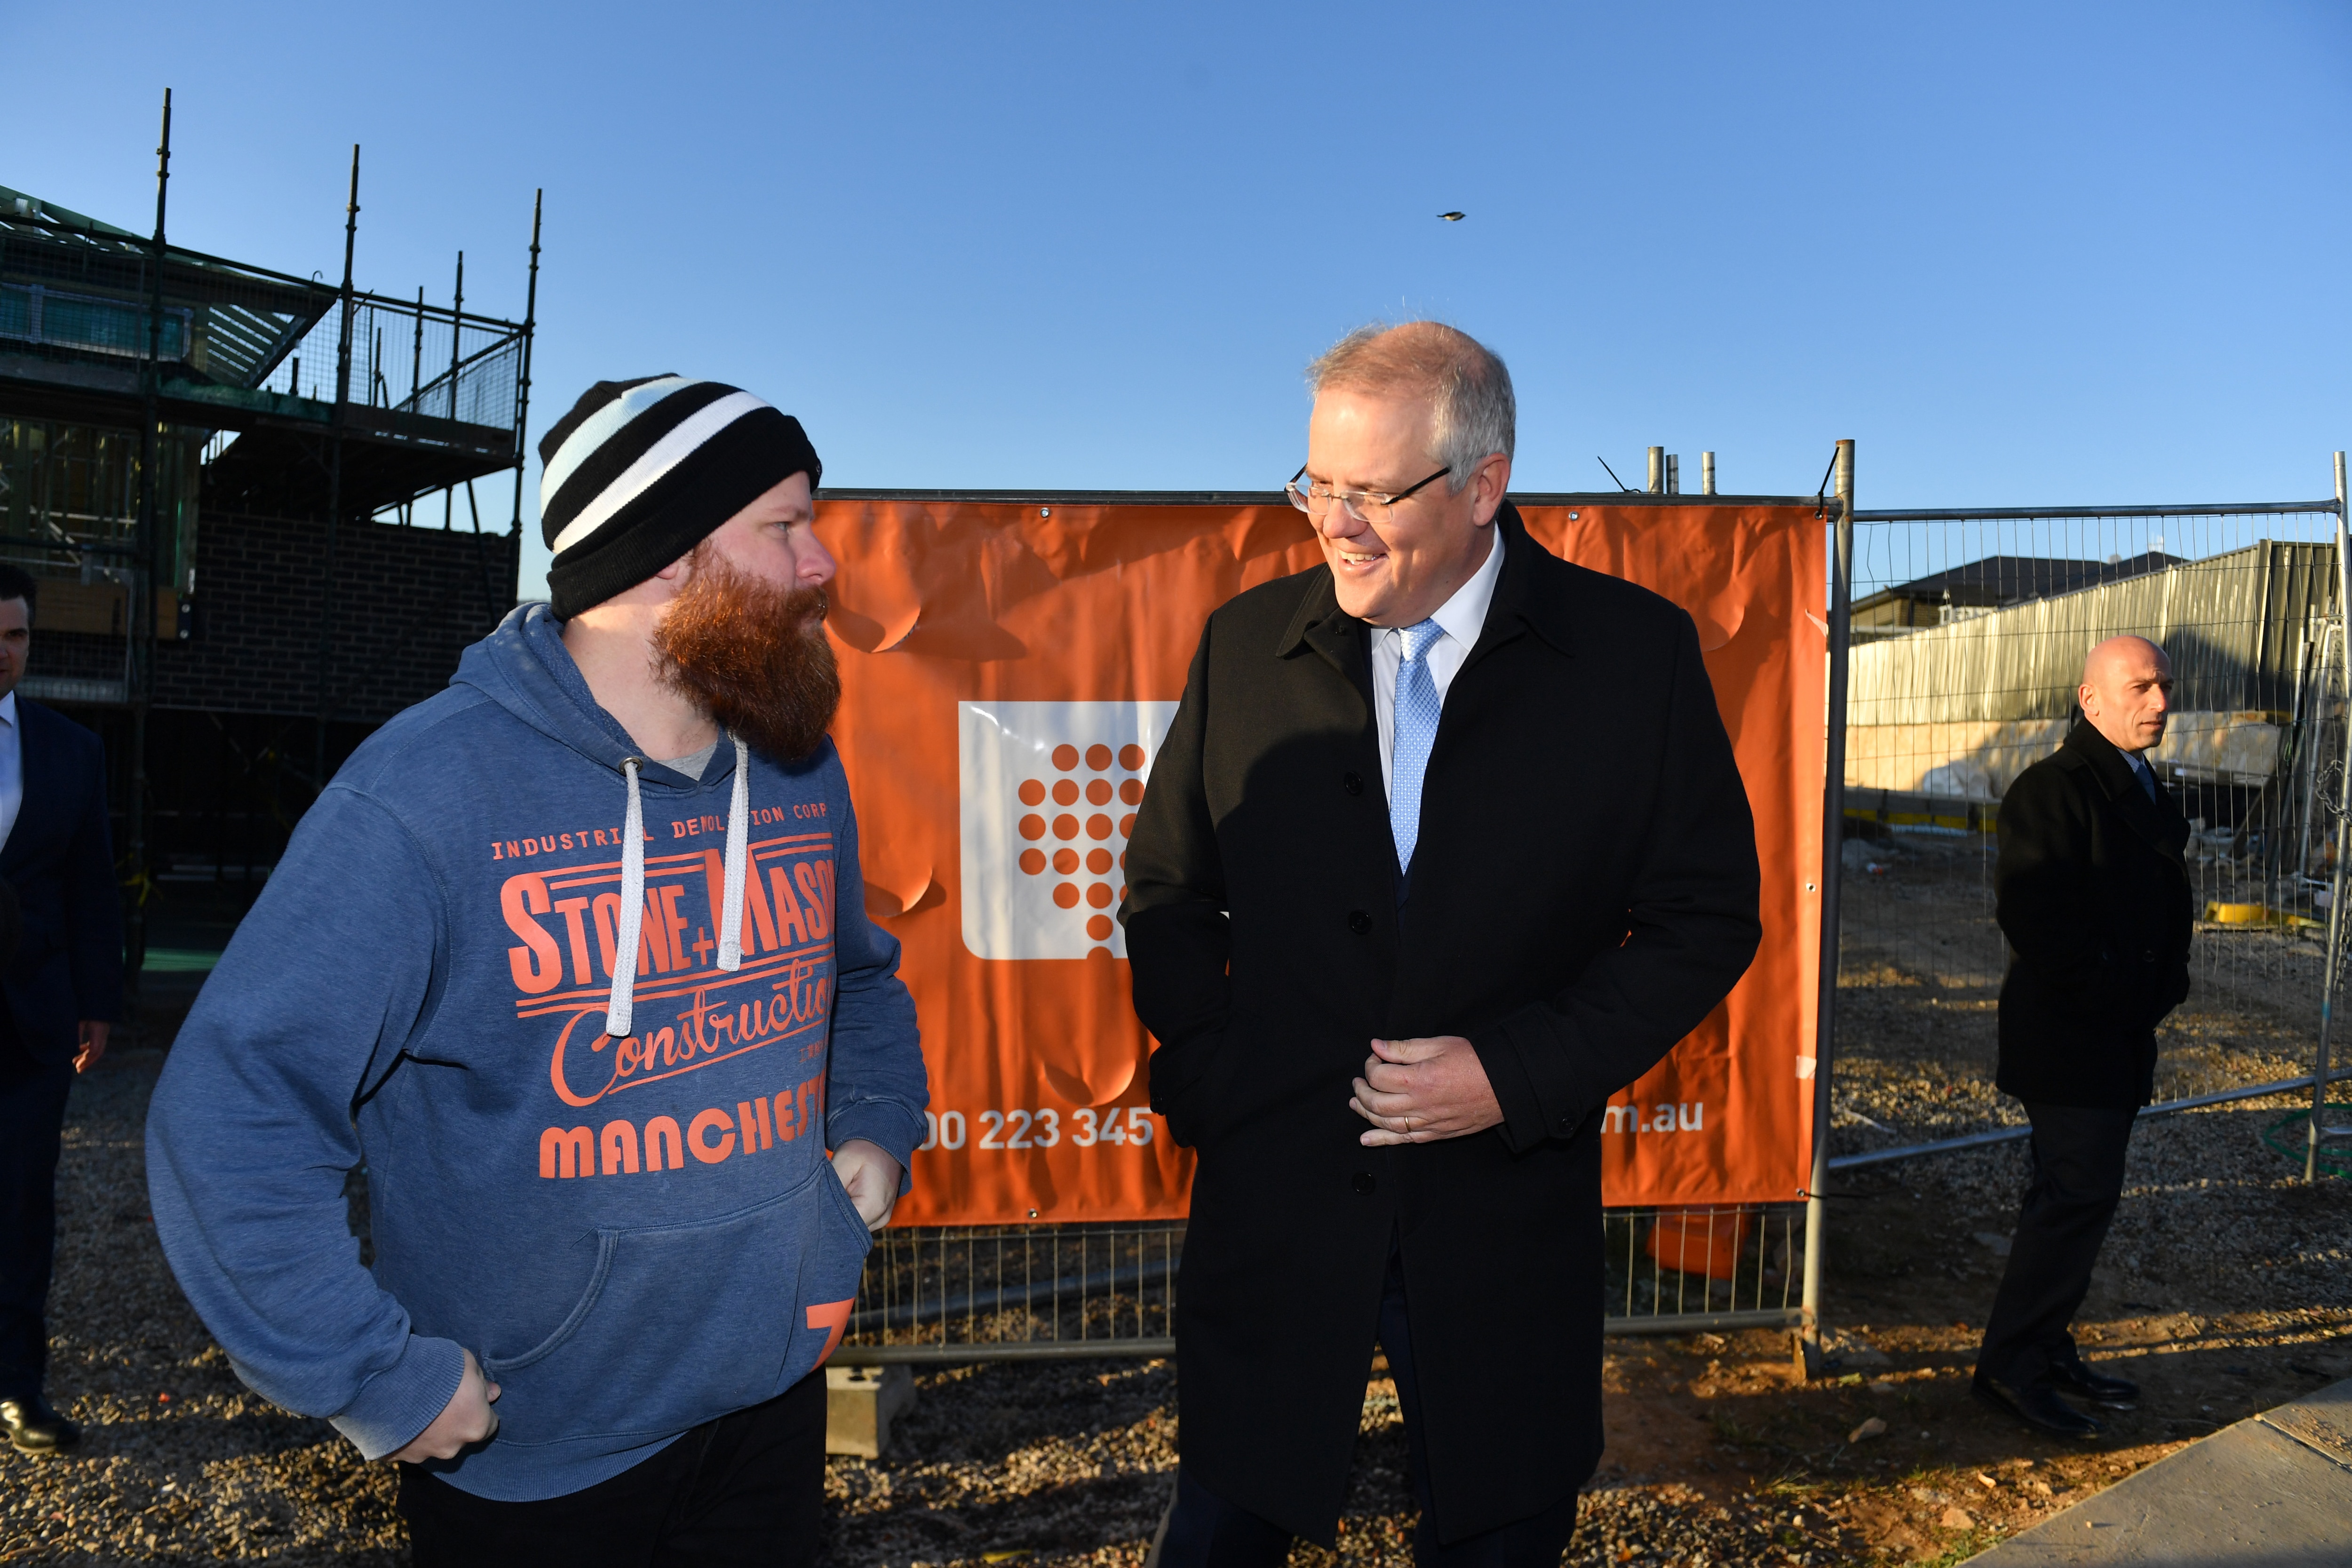 Prime Minister Scott Morrison announces the new HomeBuilder stimulus package in the NSW town of Googong.